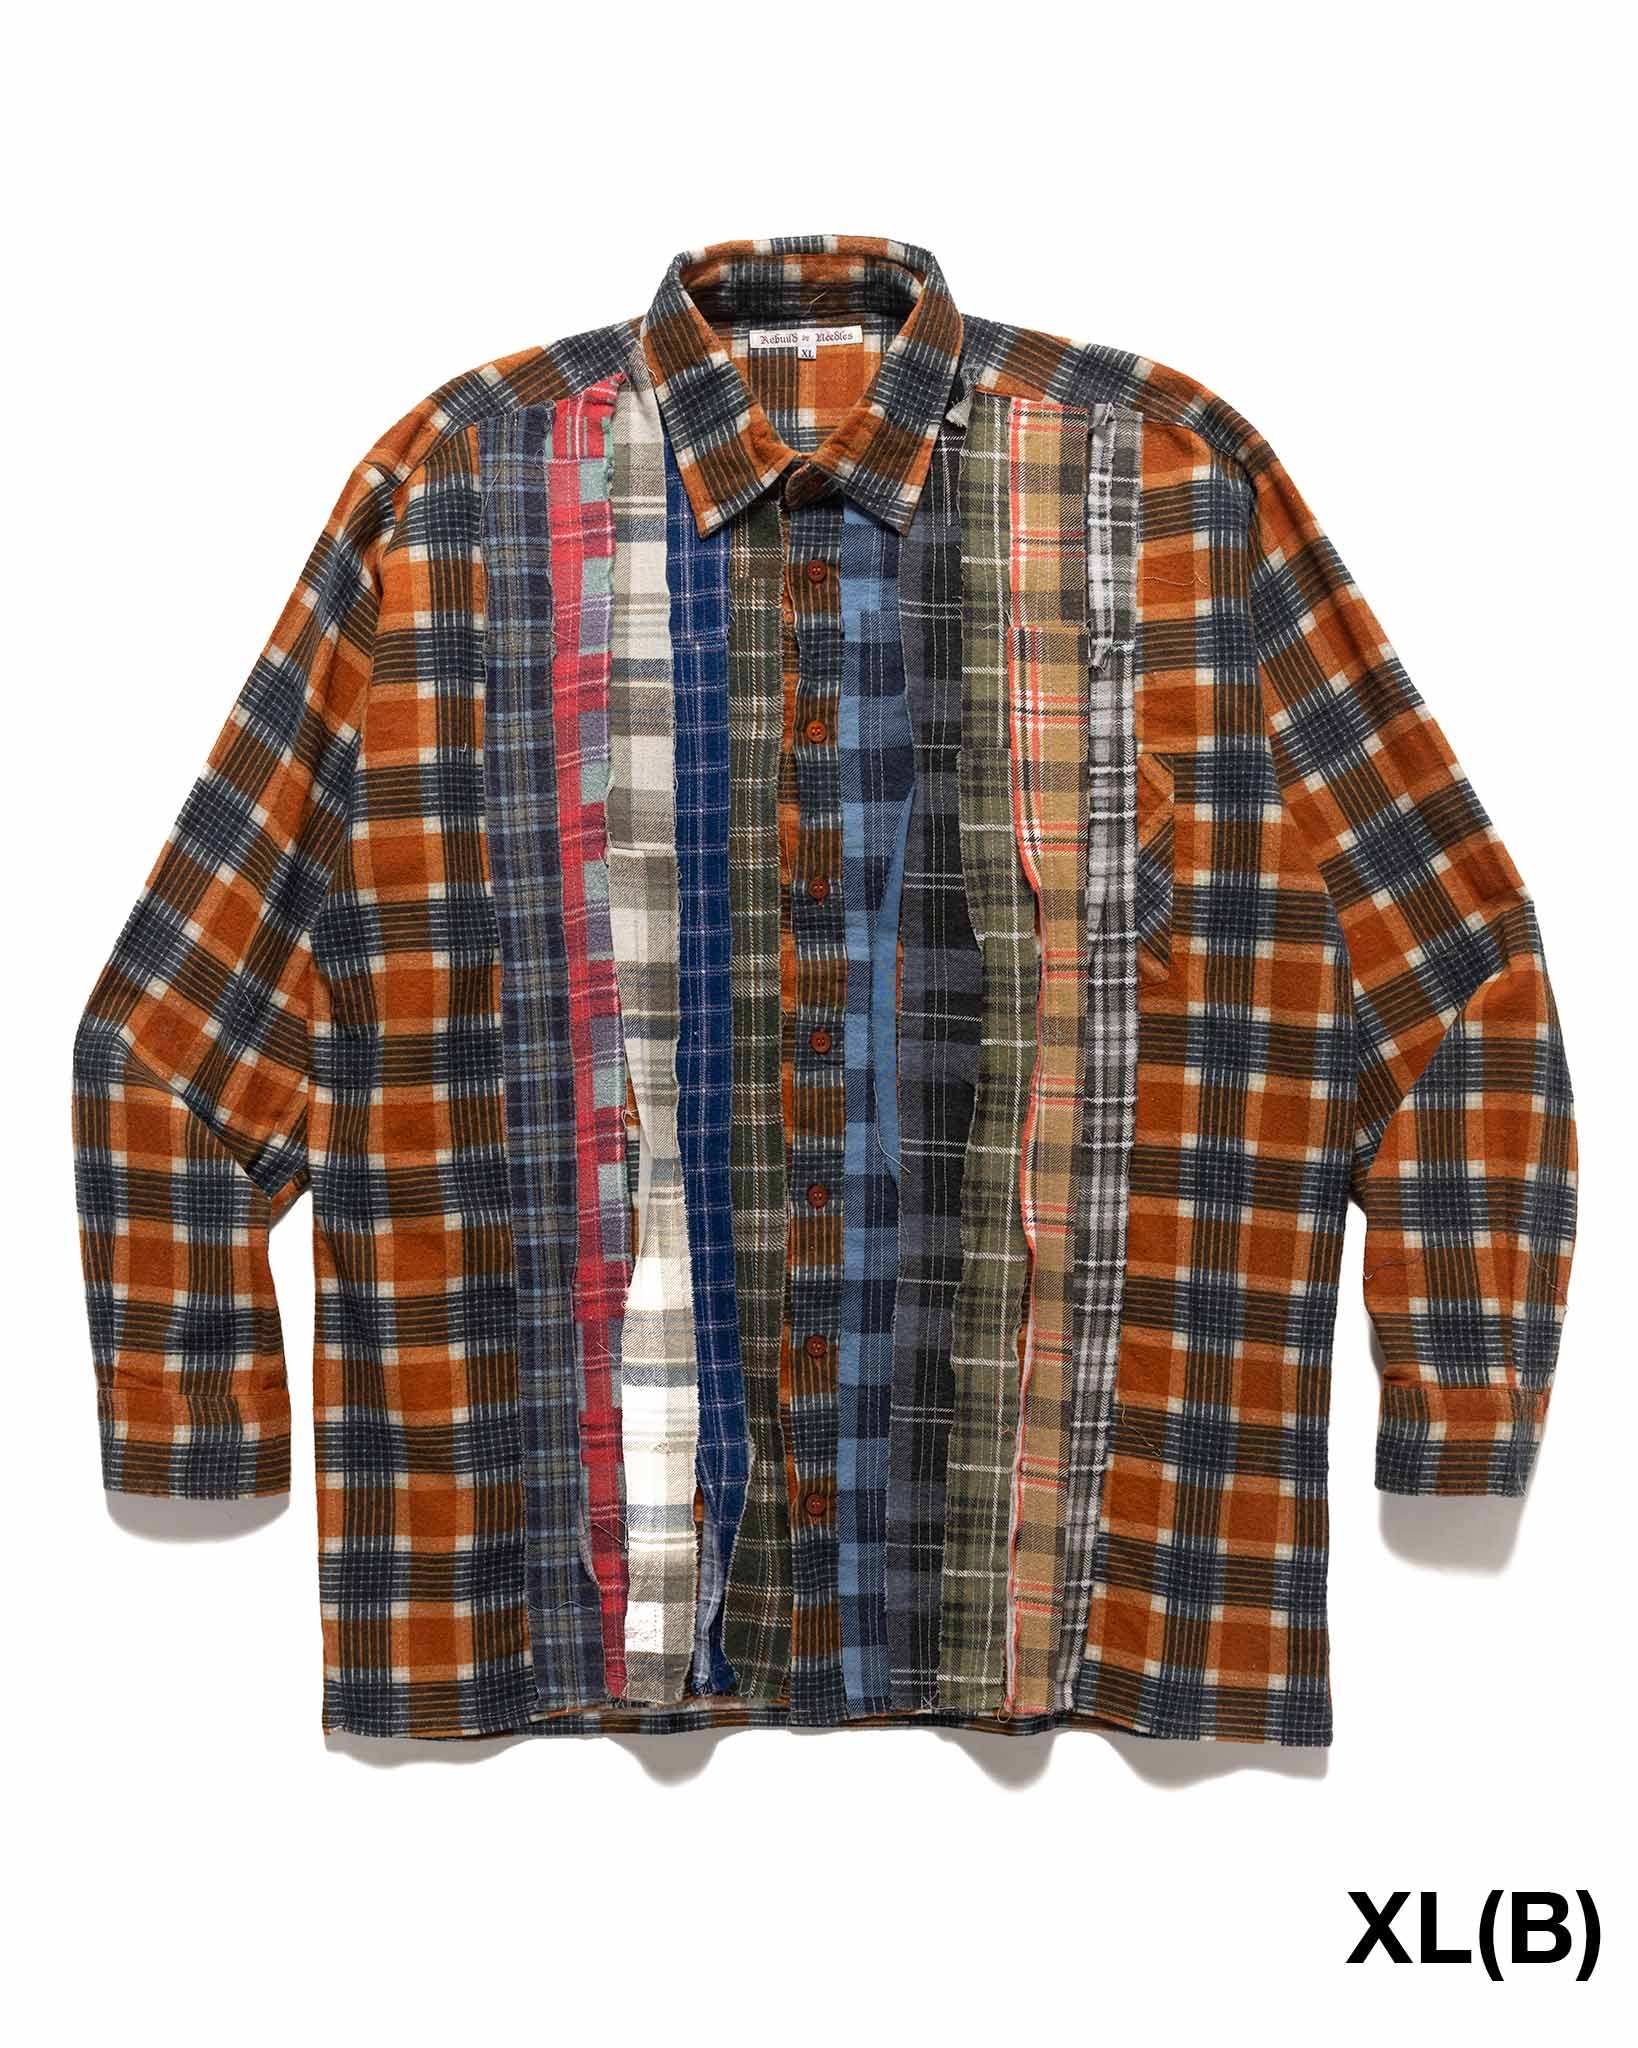 Rebuild by Needles Flannel Shirt -> Ribbon Shirt Assorted - 18